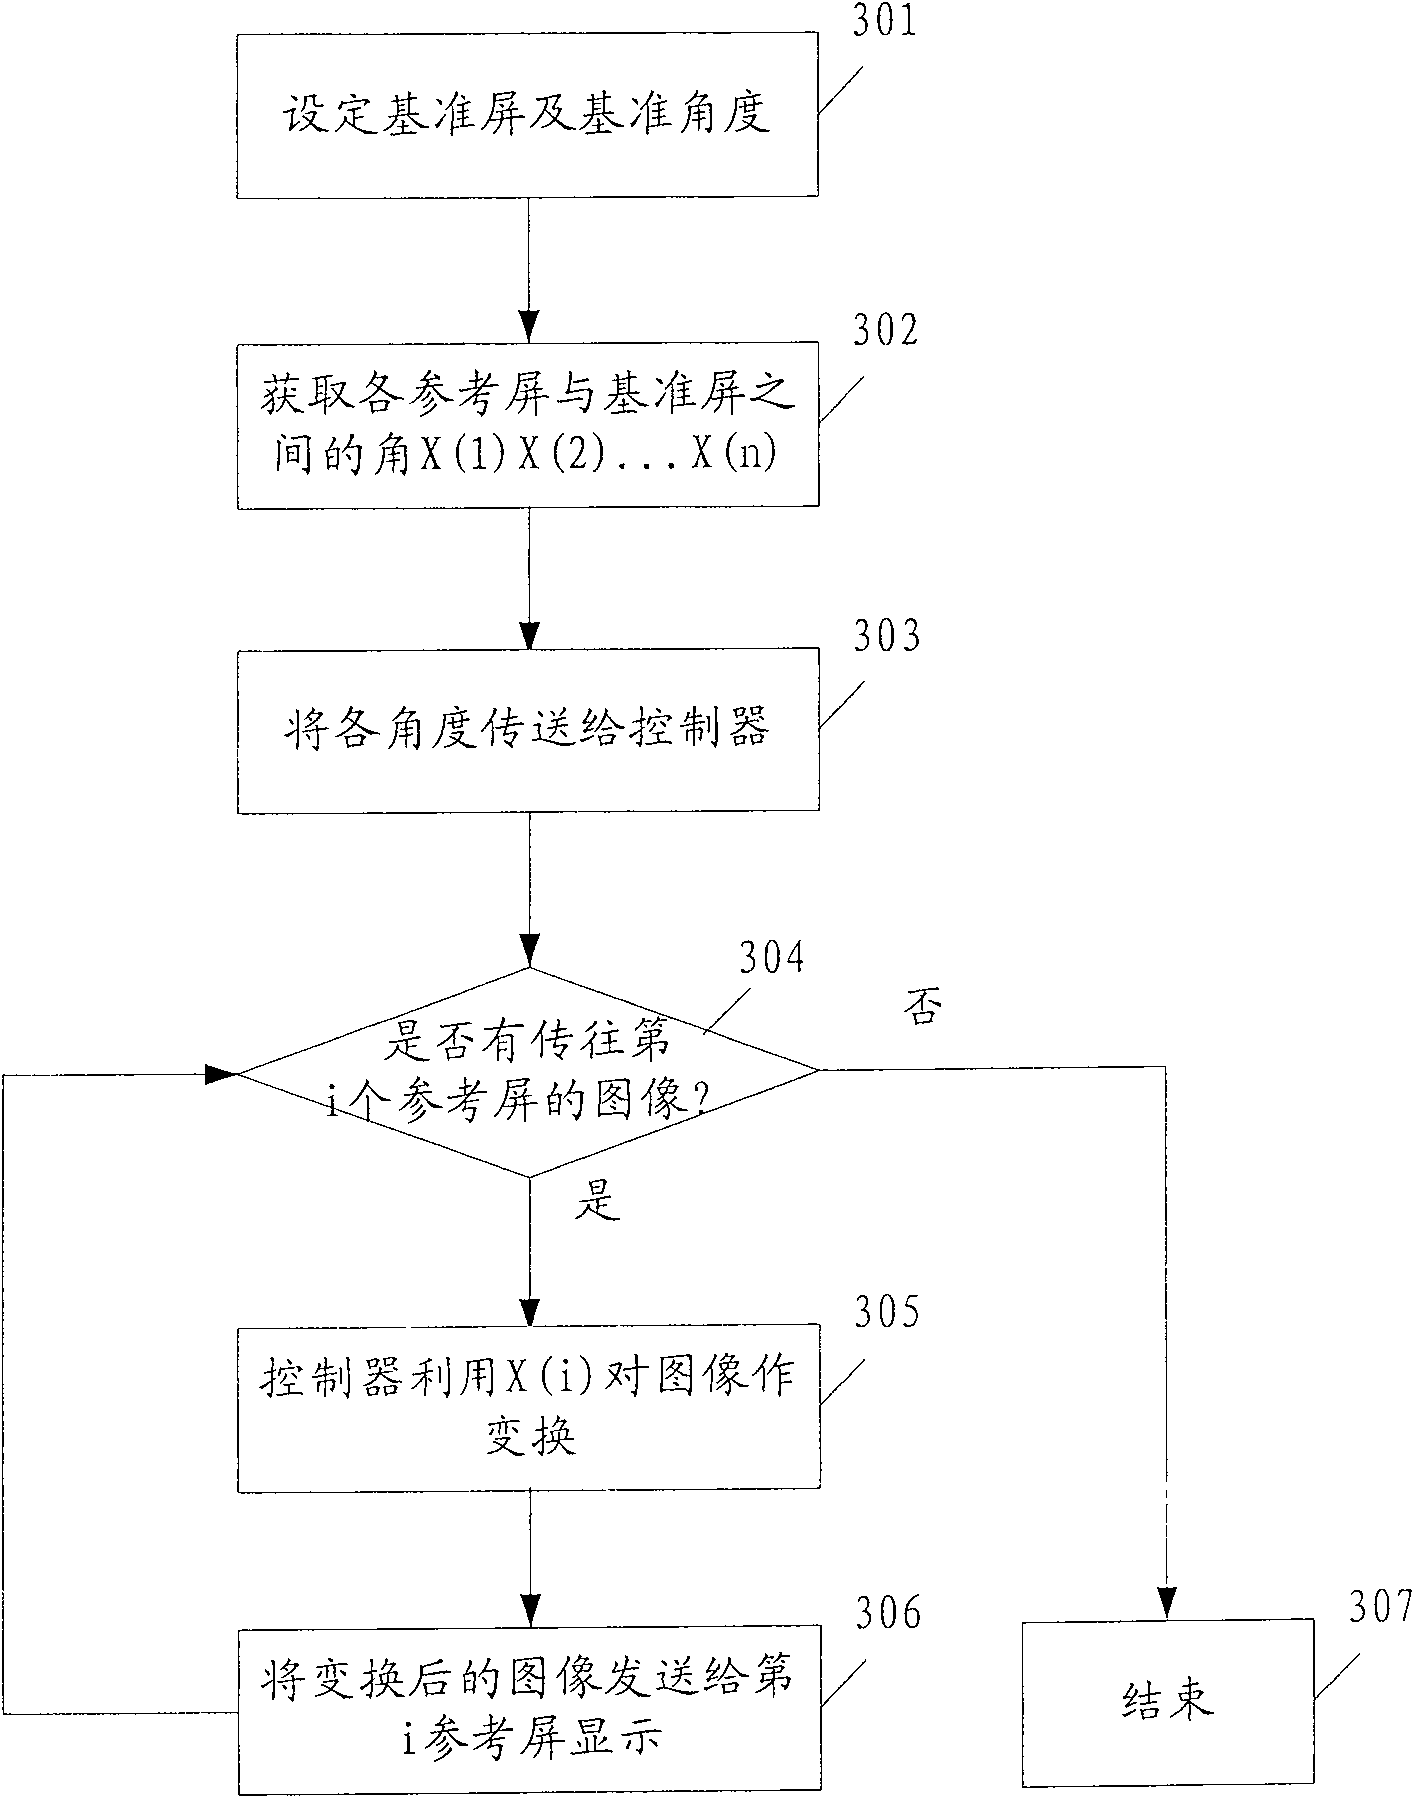 Multi-screen display process and system